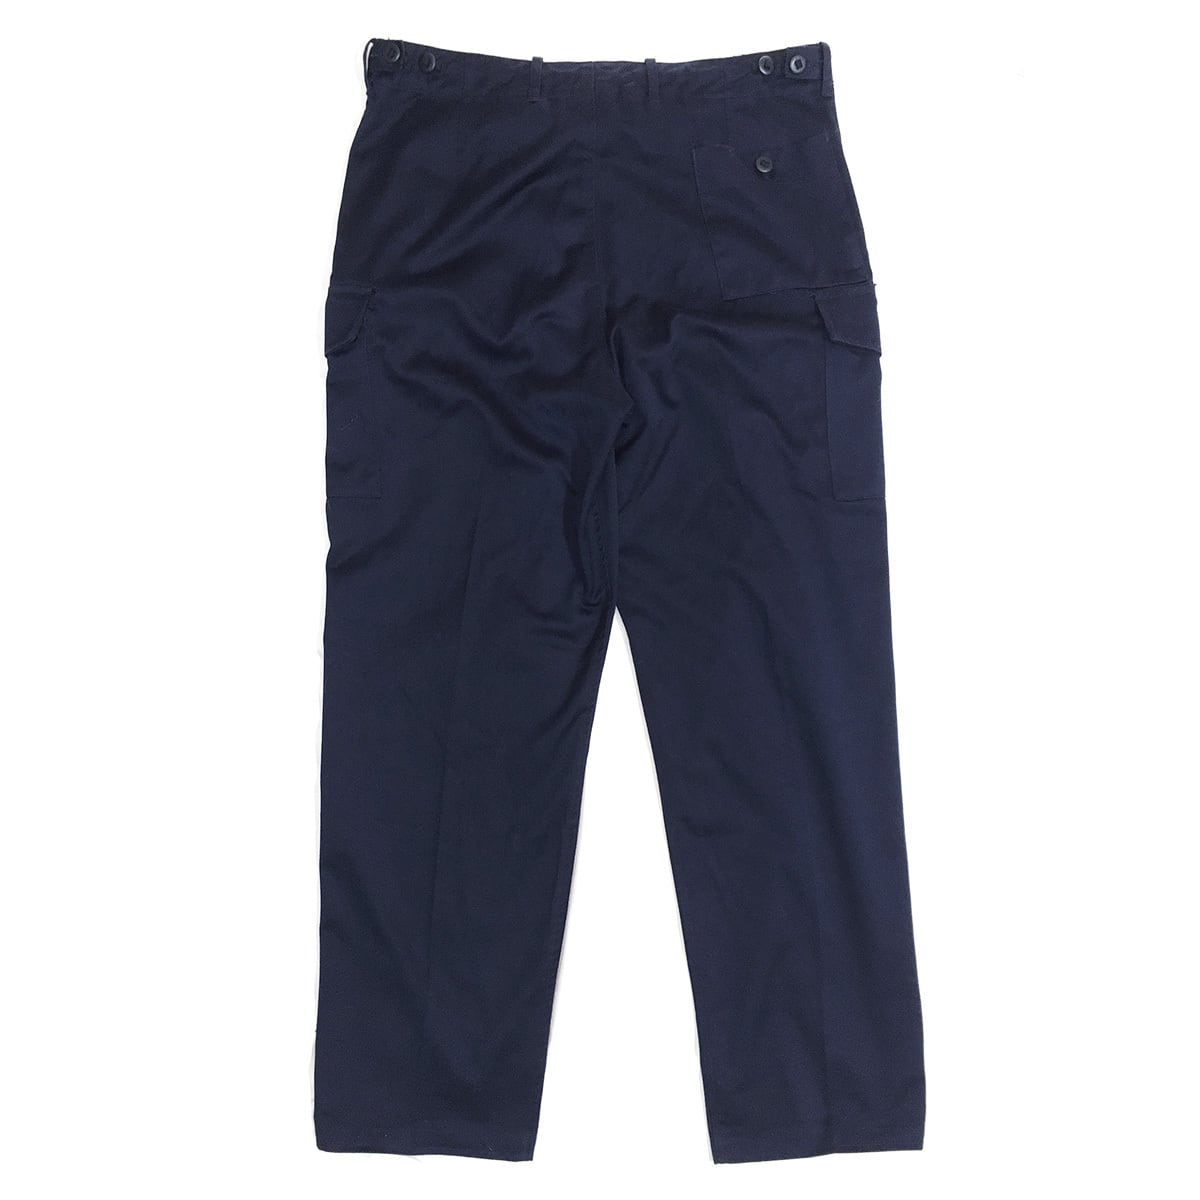 ［ROYAL NAVY CARGO TROUSERS USED］イギリス海軍